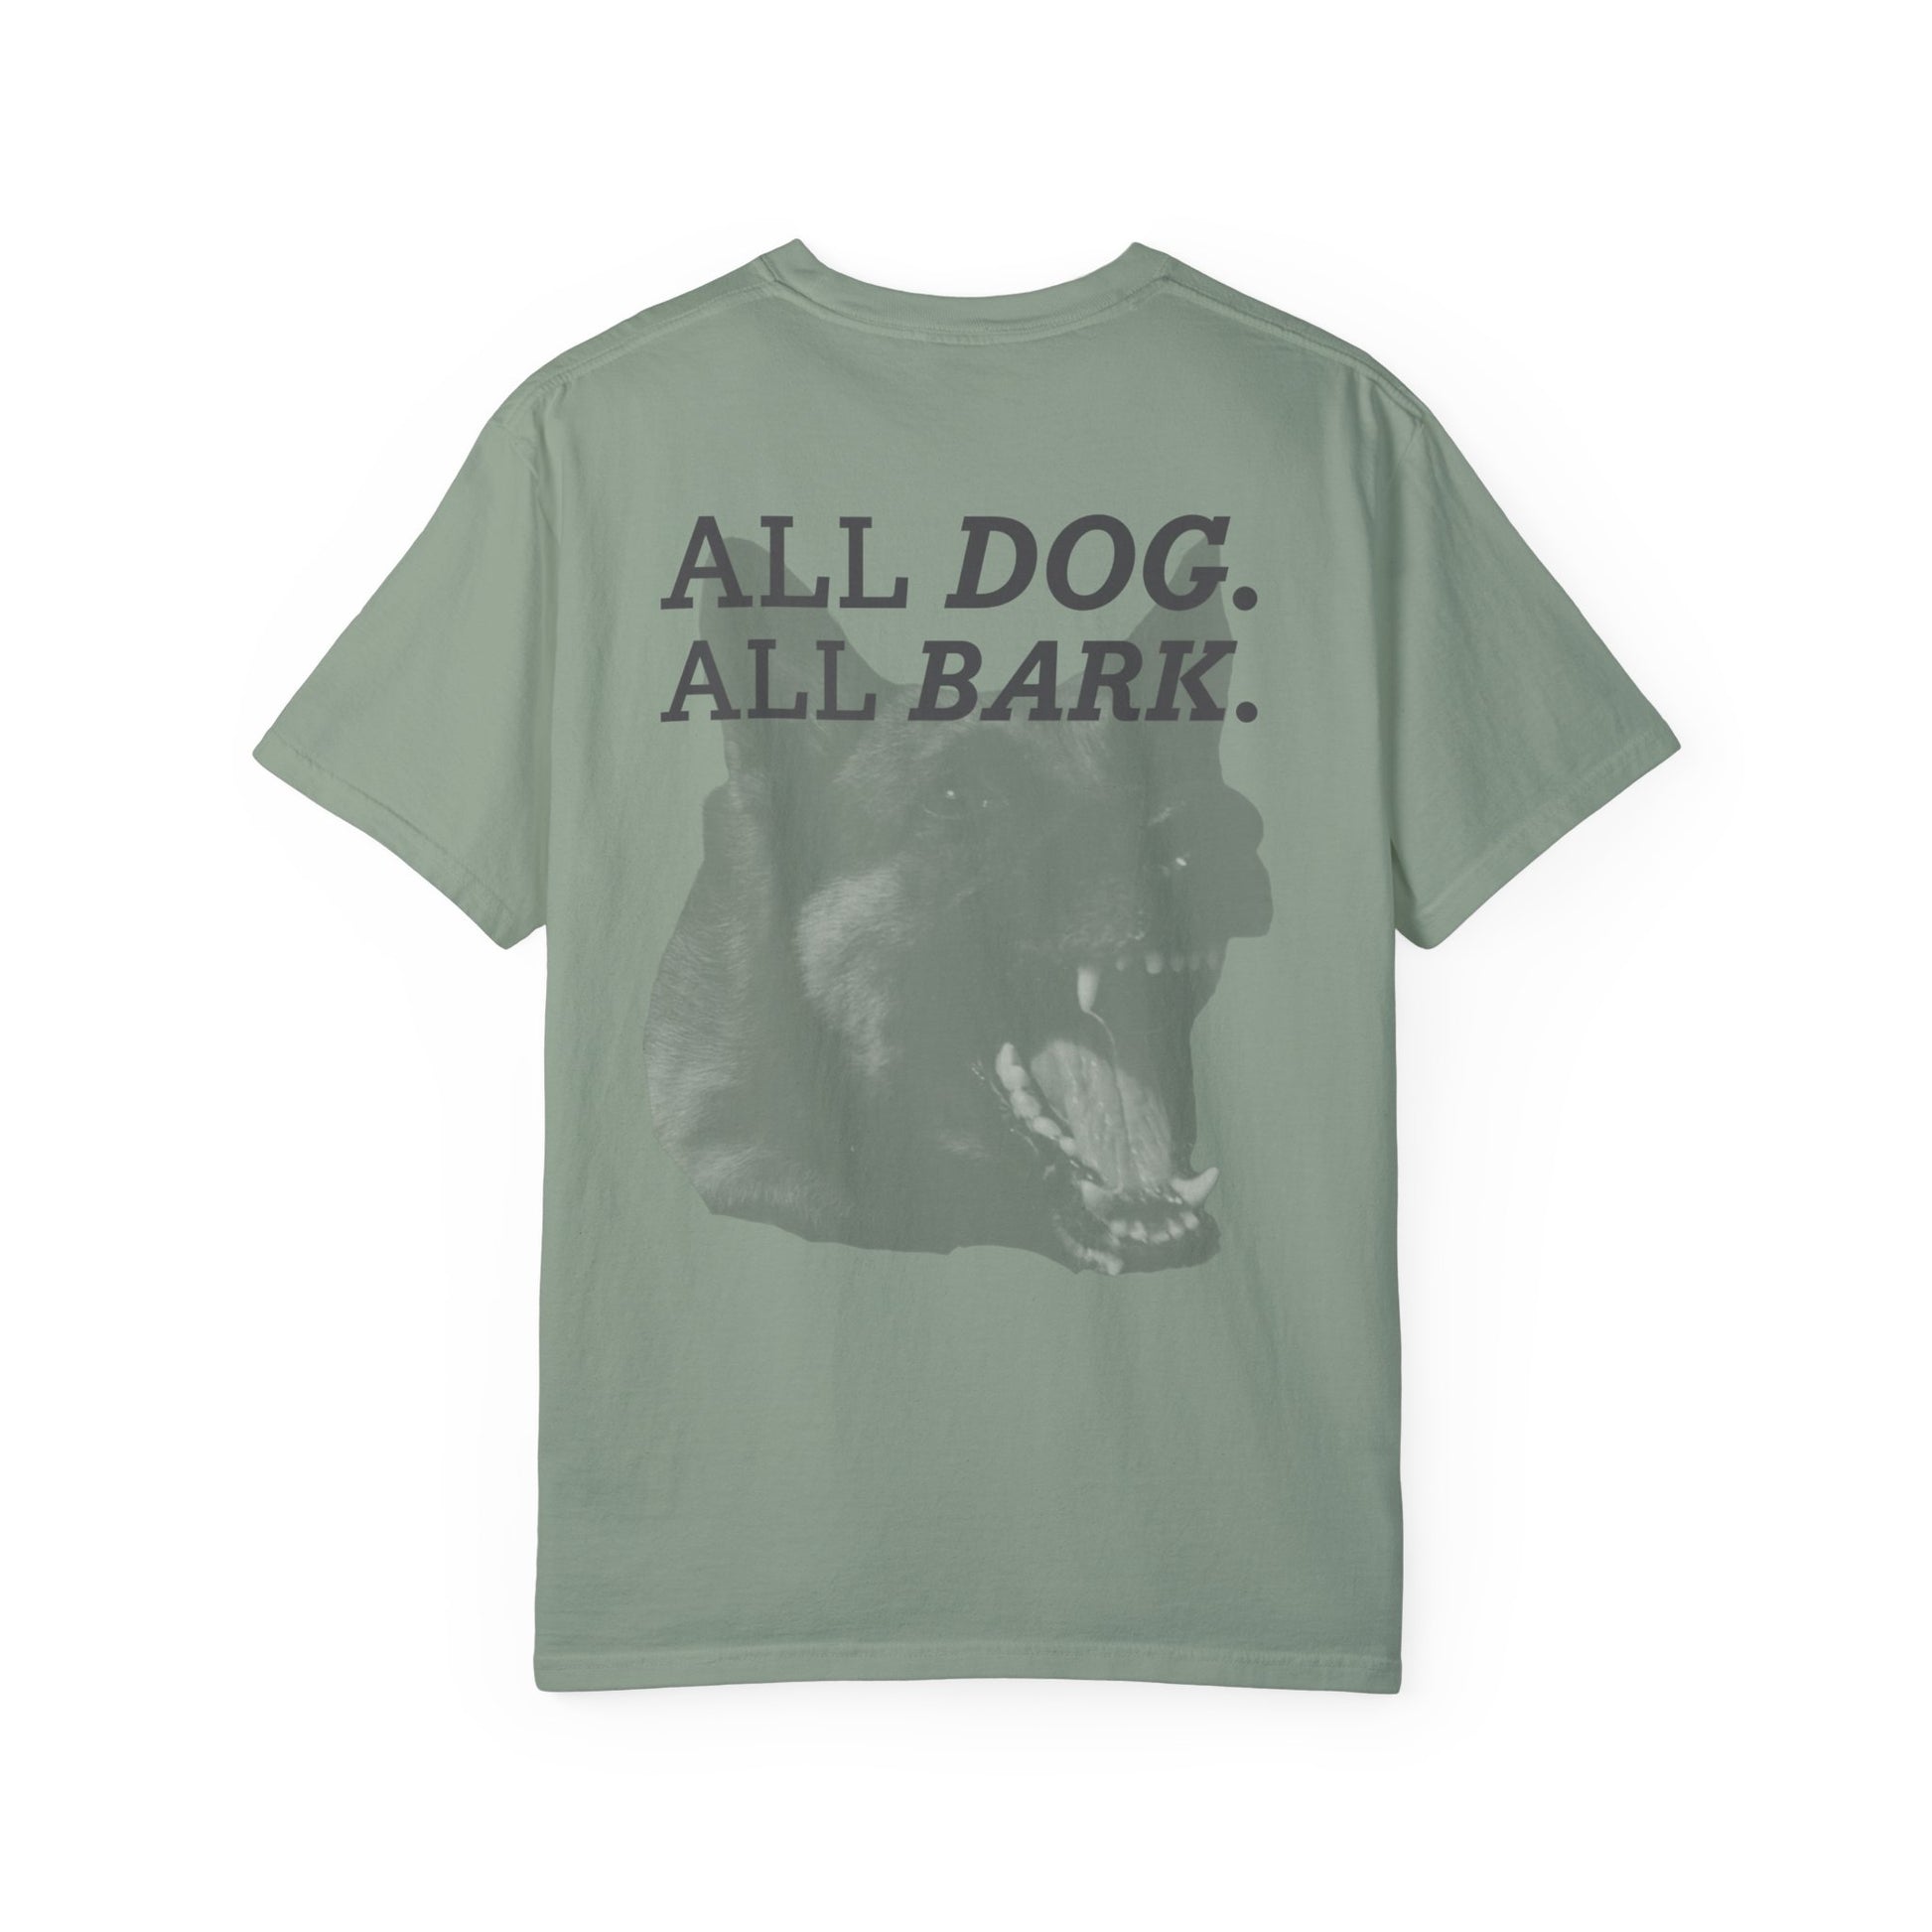 Casual Bay T-Shirt w/ Text And Dog Graphic